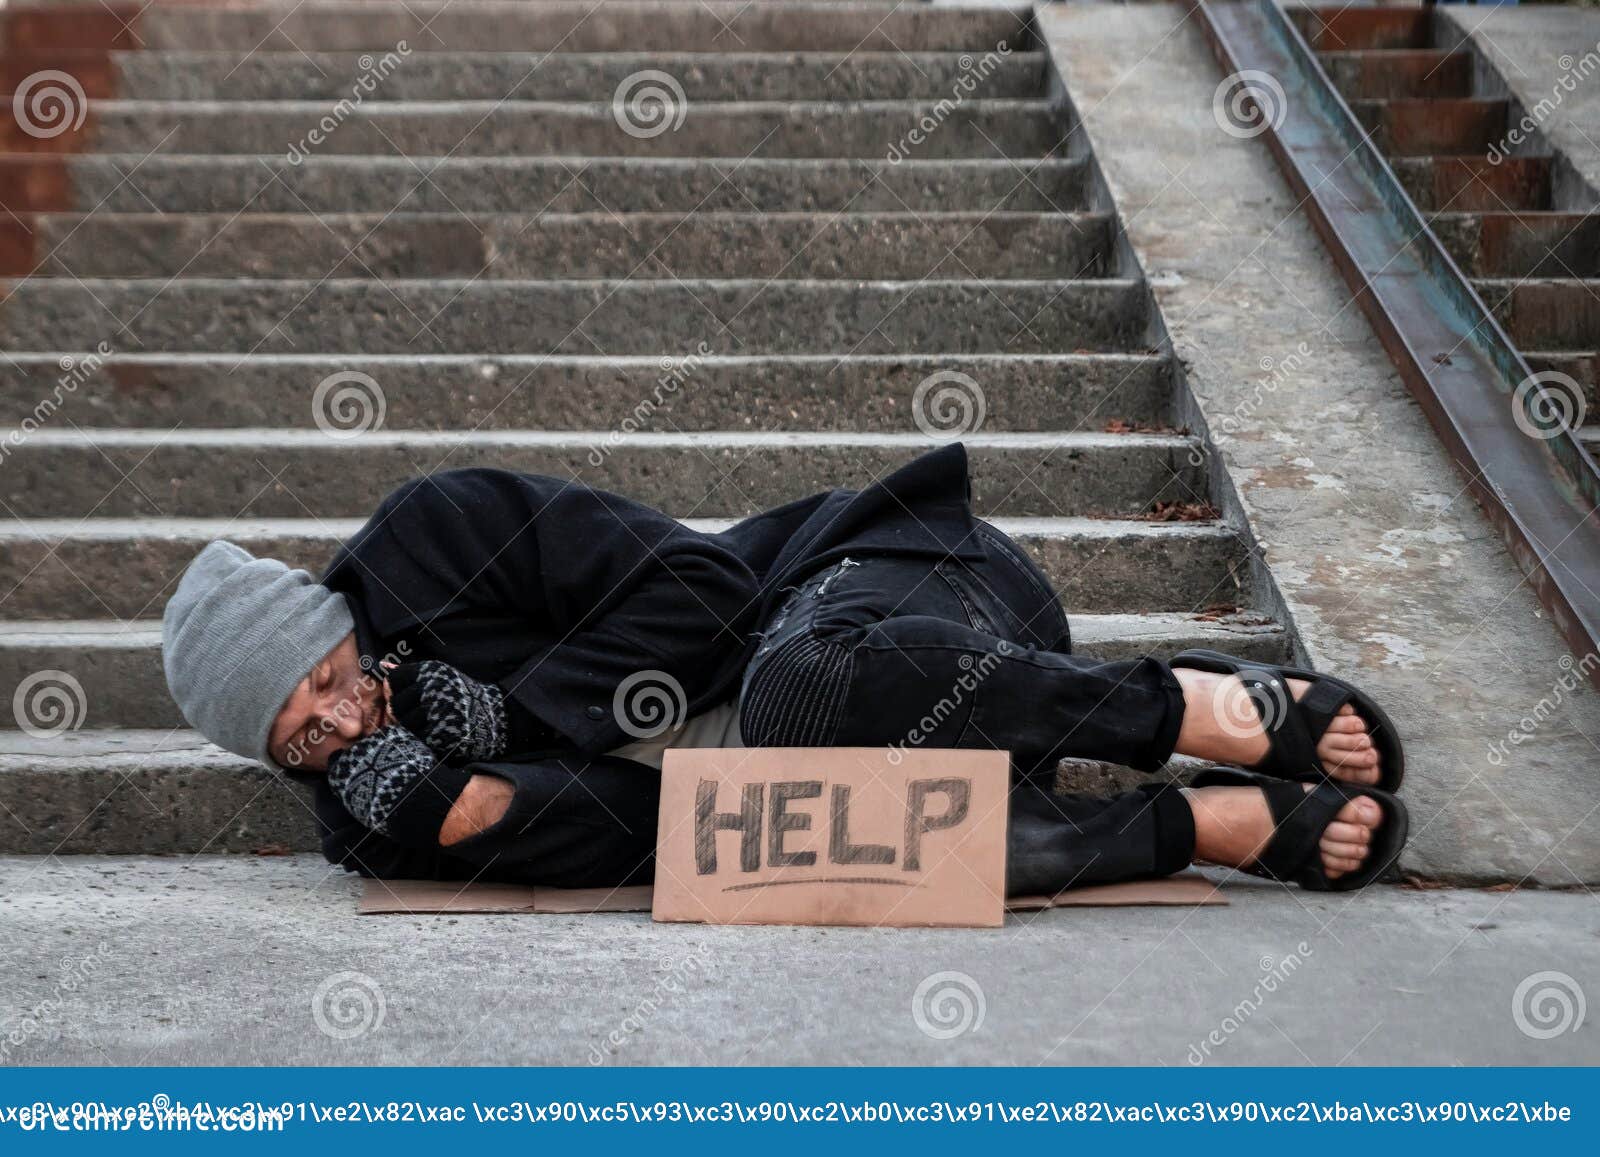 A Man Homeless A Man Sleeping On A Cold Floor In The Street With